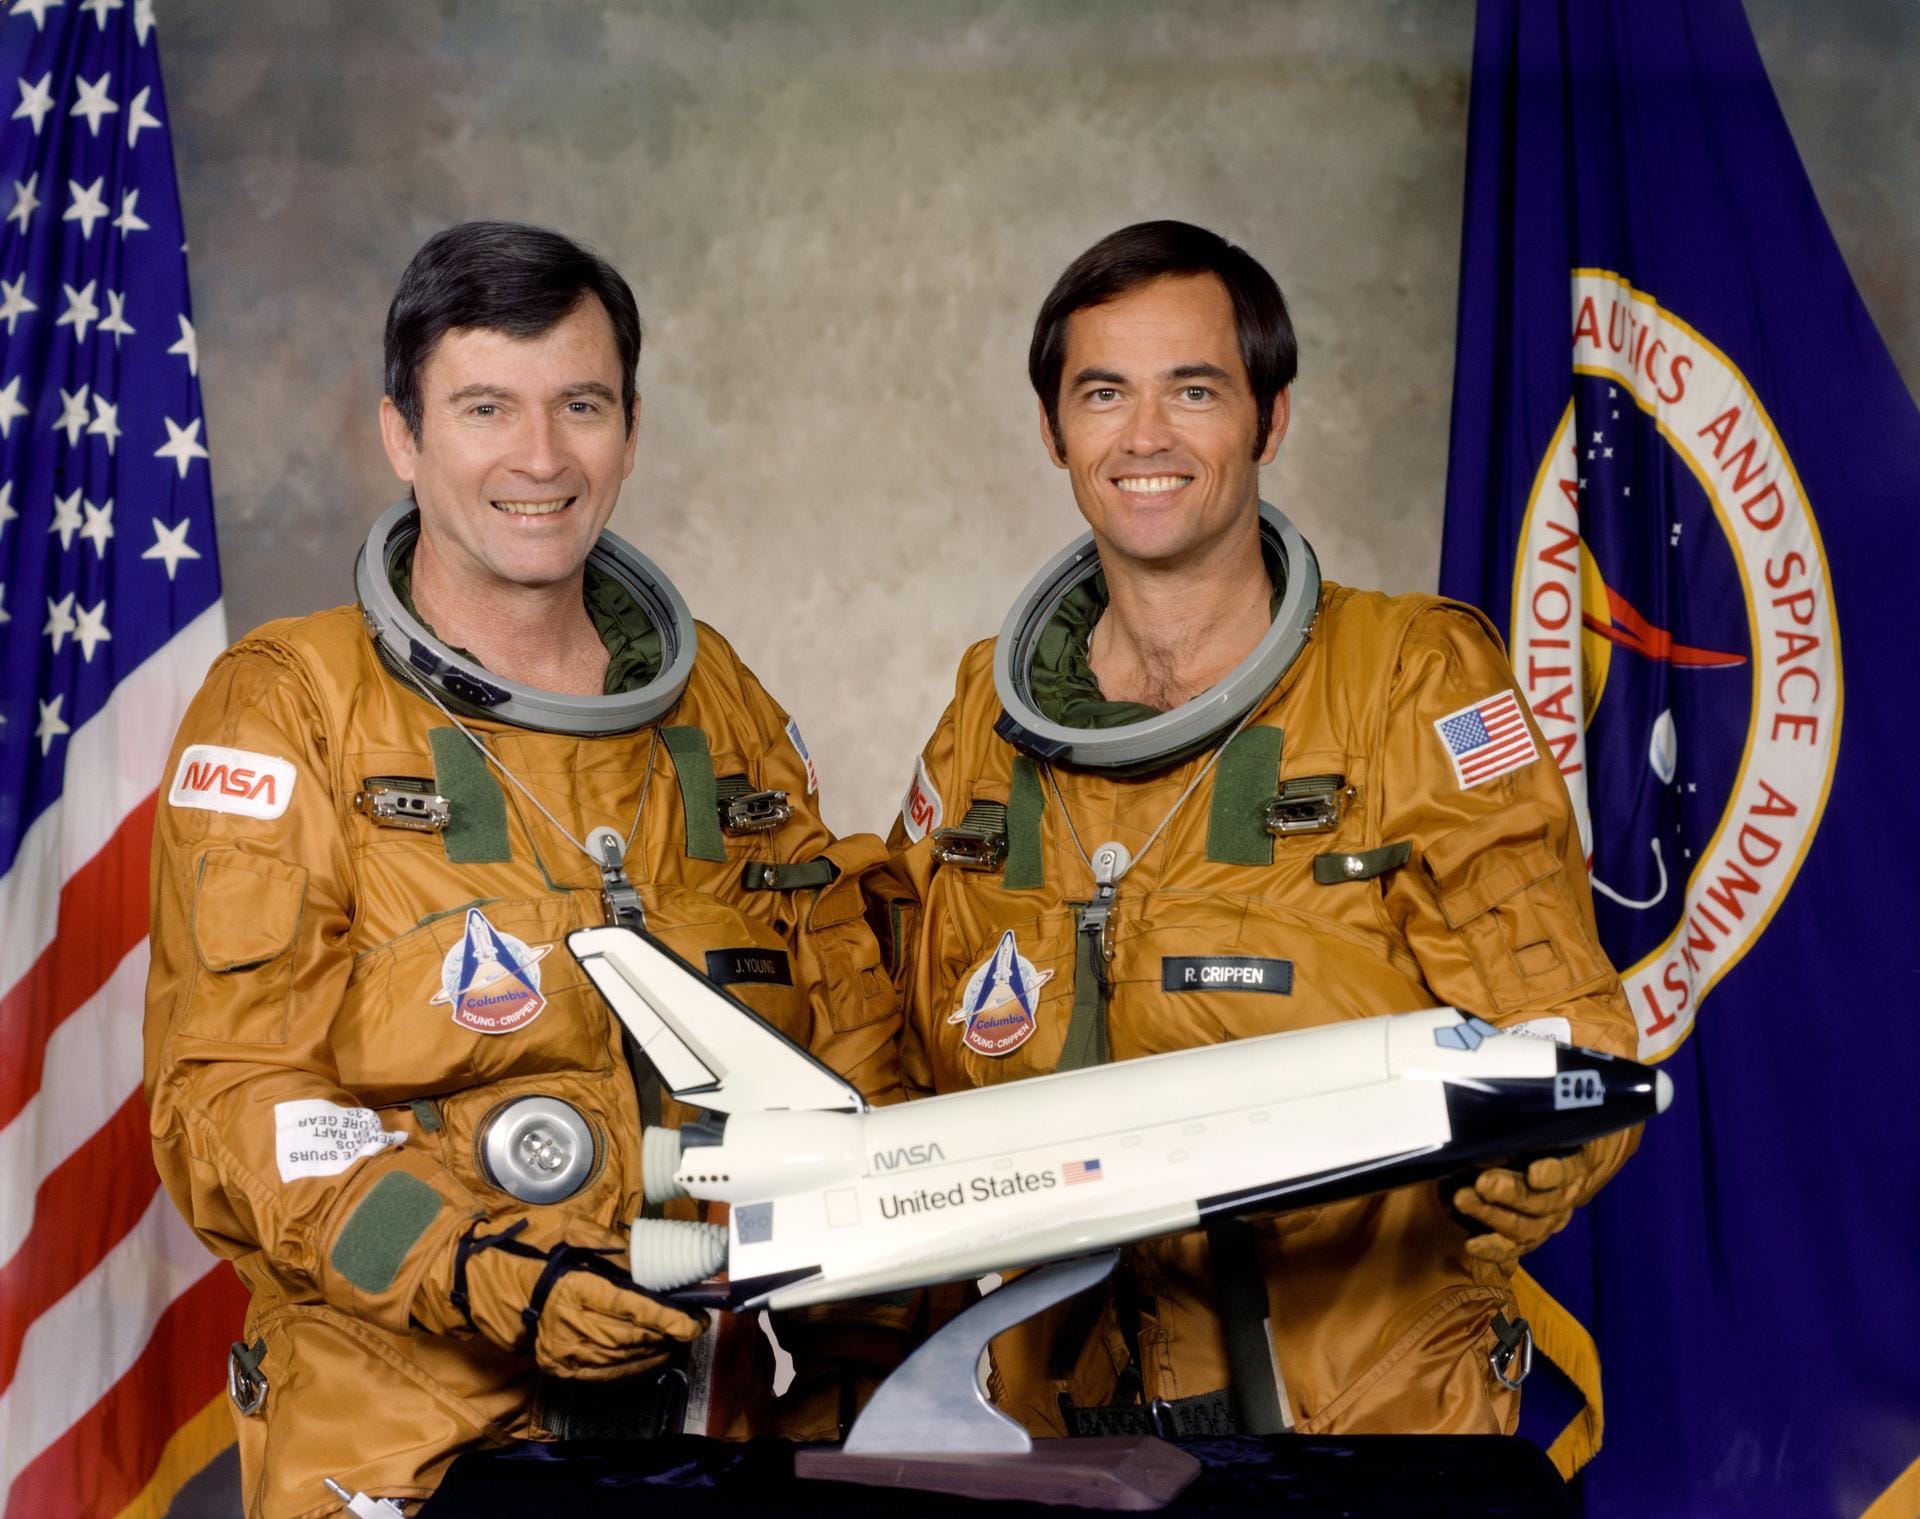 John Young (left) and Robert Crippen (right) with a model of the Space Shuttle in April 1979. ©NASA